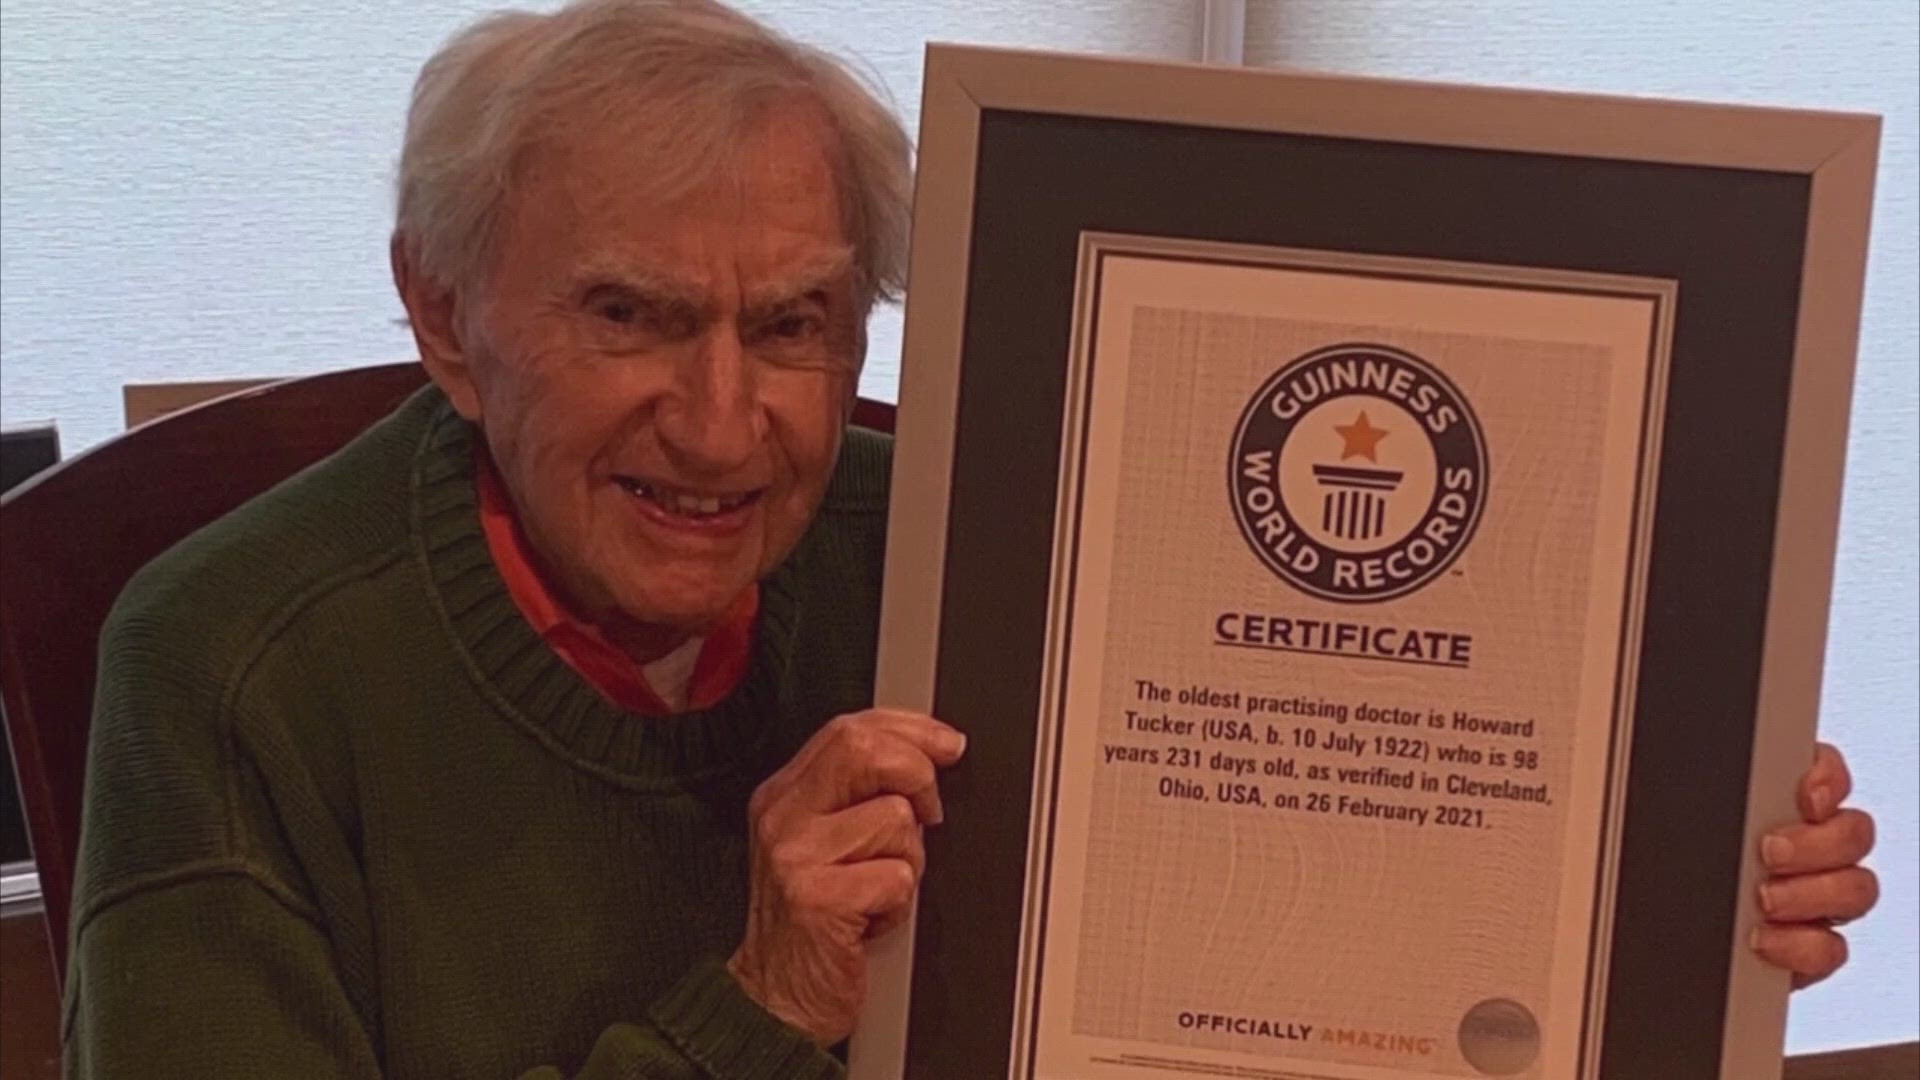 Dr. Howard Tucker is recognized by the Guinness Book of World Records as the oldest practicing doctor. Now, he can add movie star to his resume.